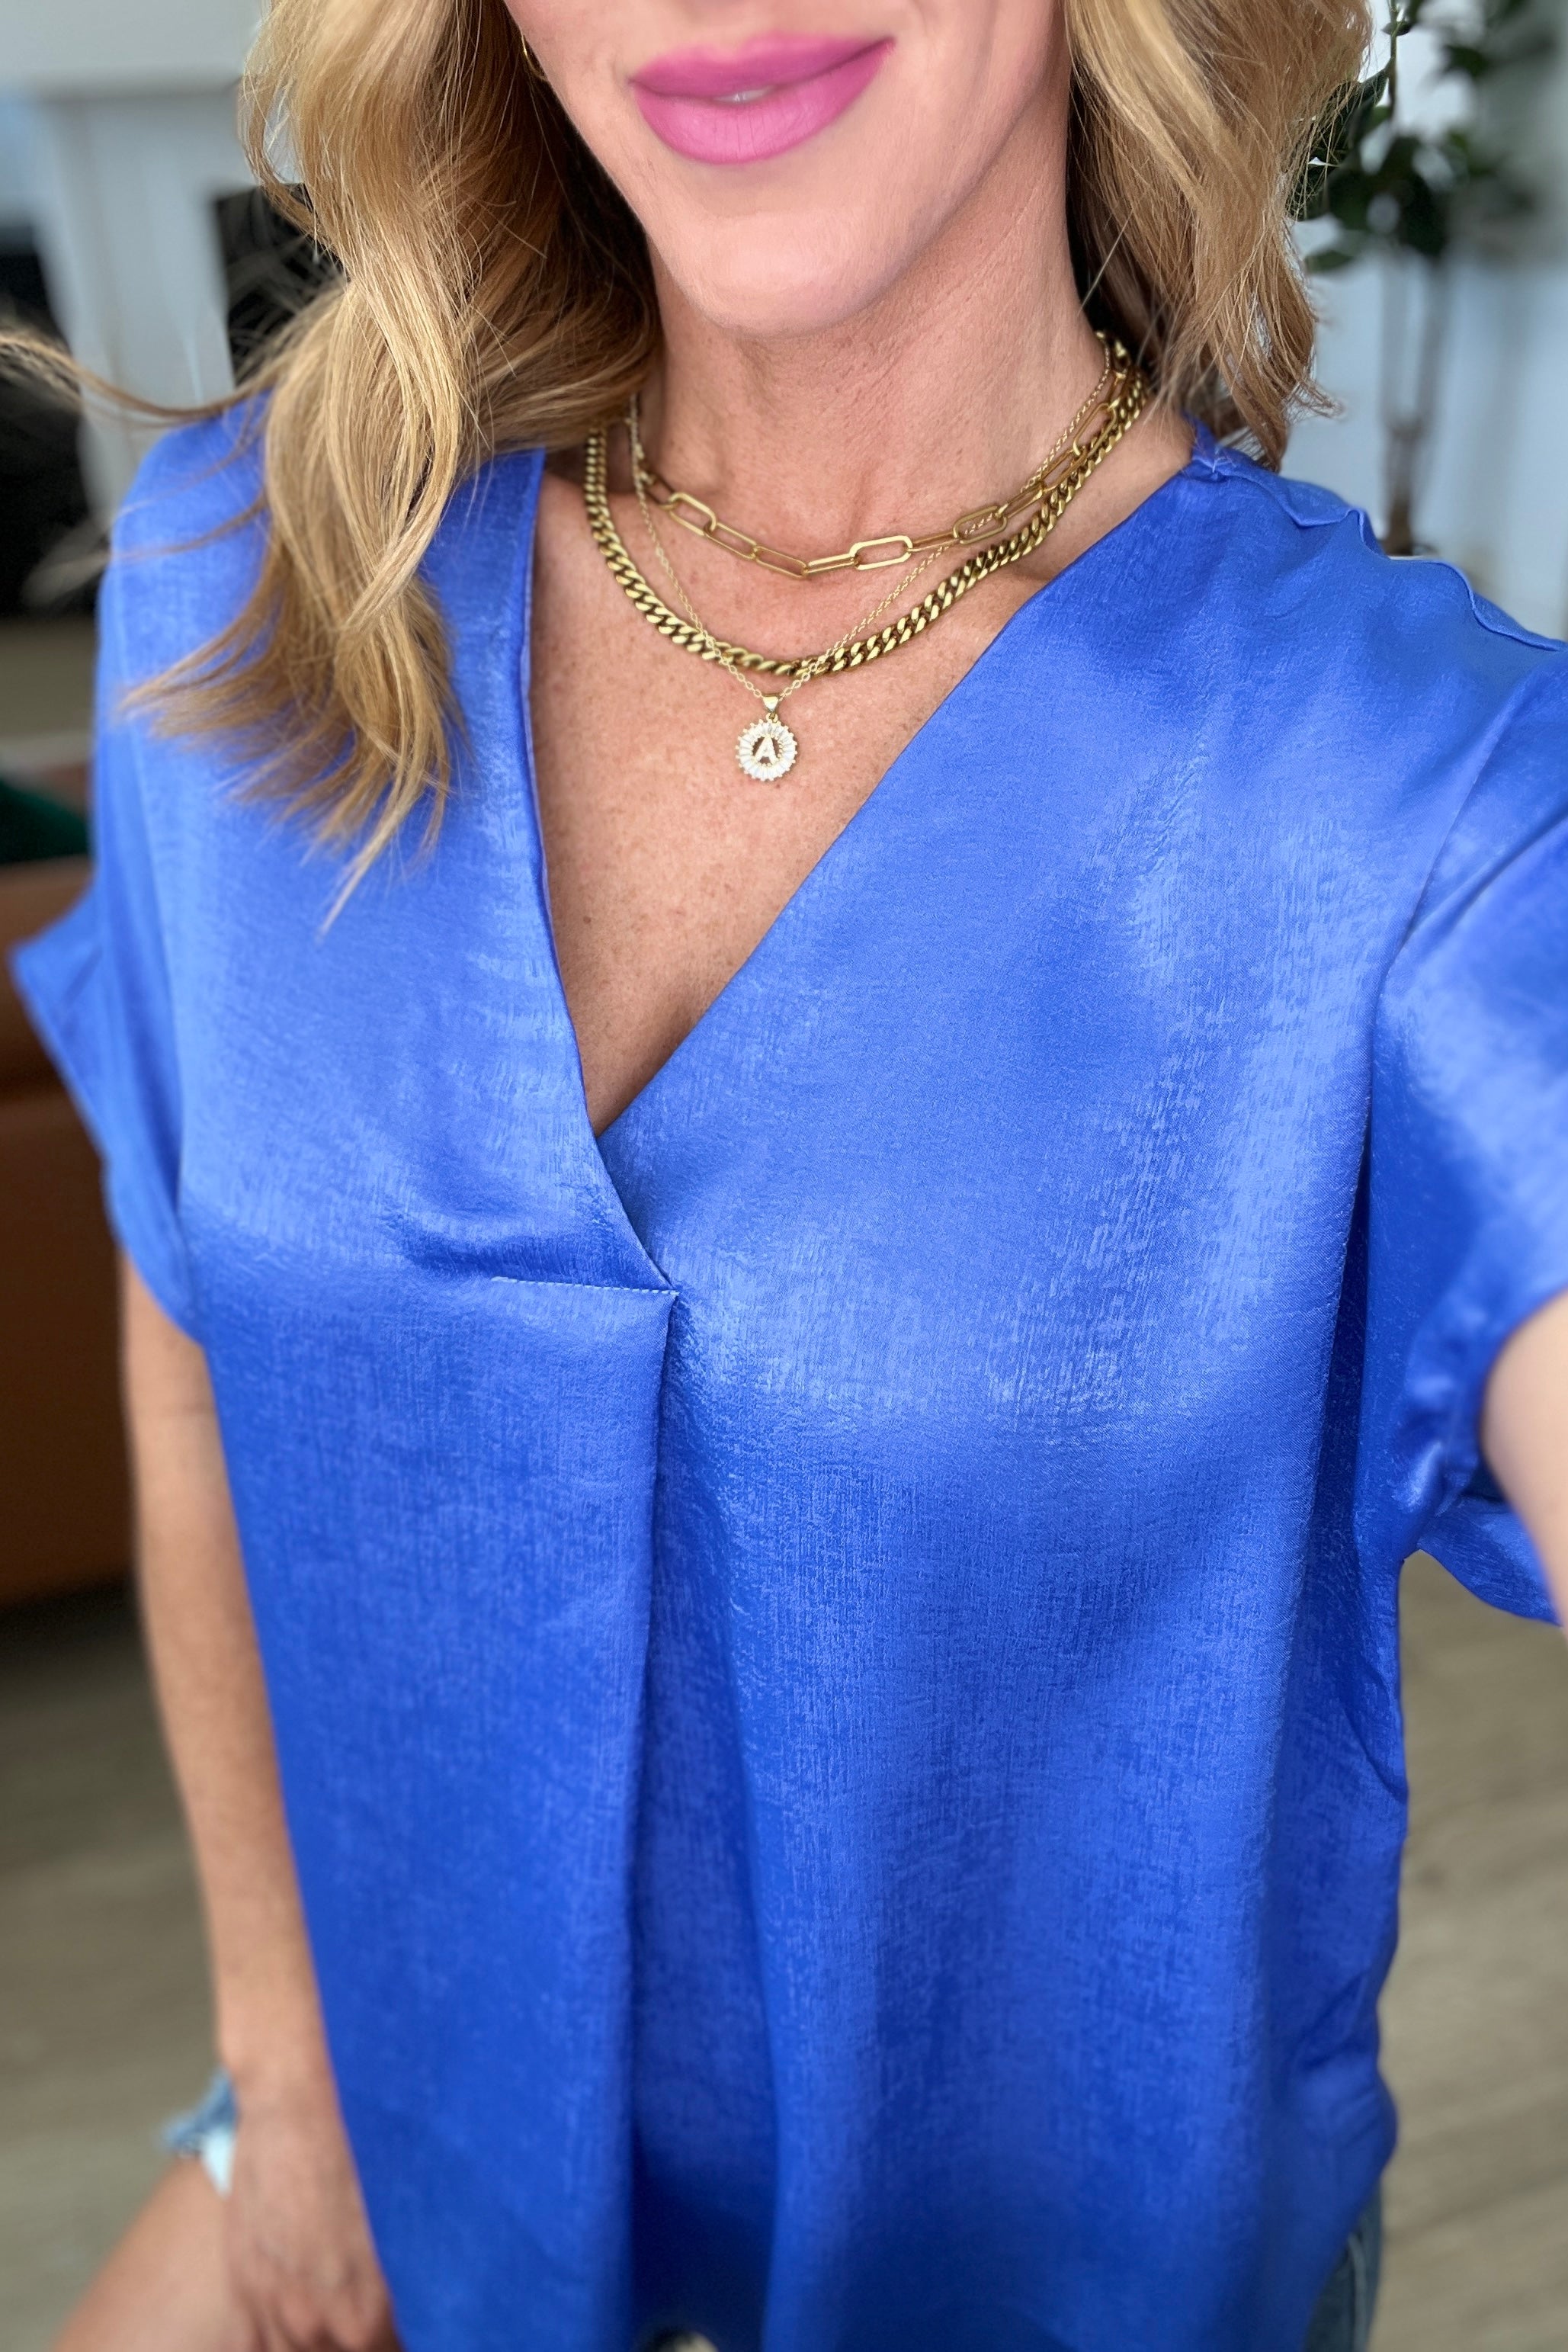 DOORBUSTER: Pleat Front V-Neck Top in Royal Blue (Ships in 1-2 Weeks)